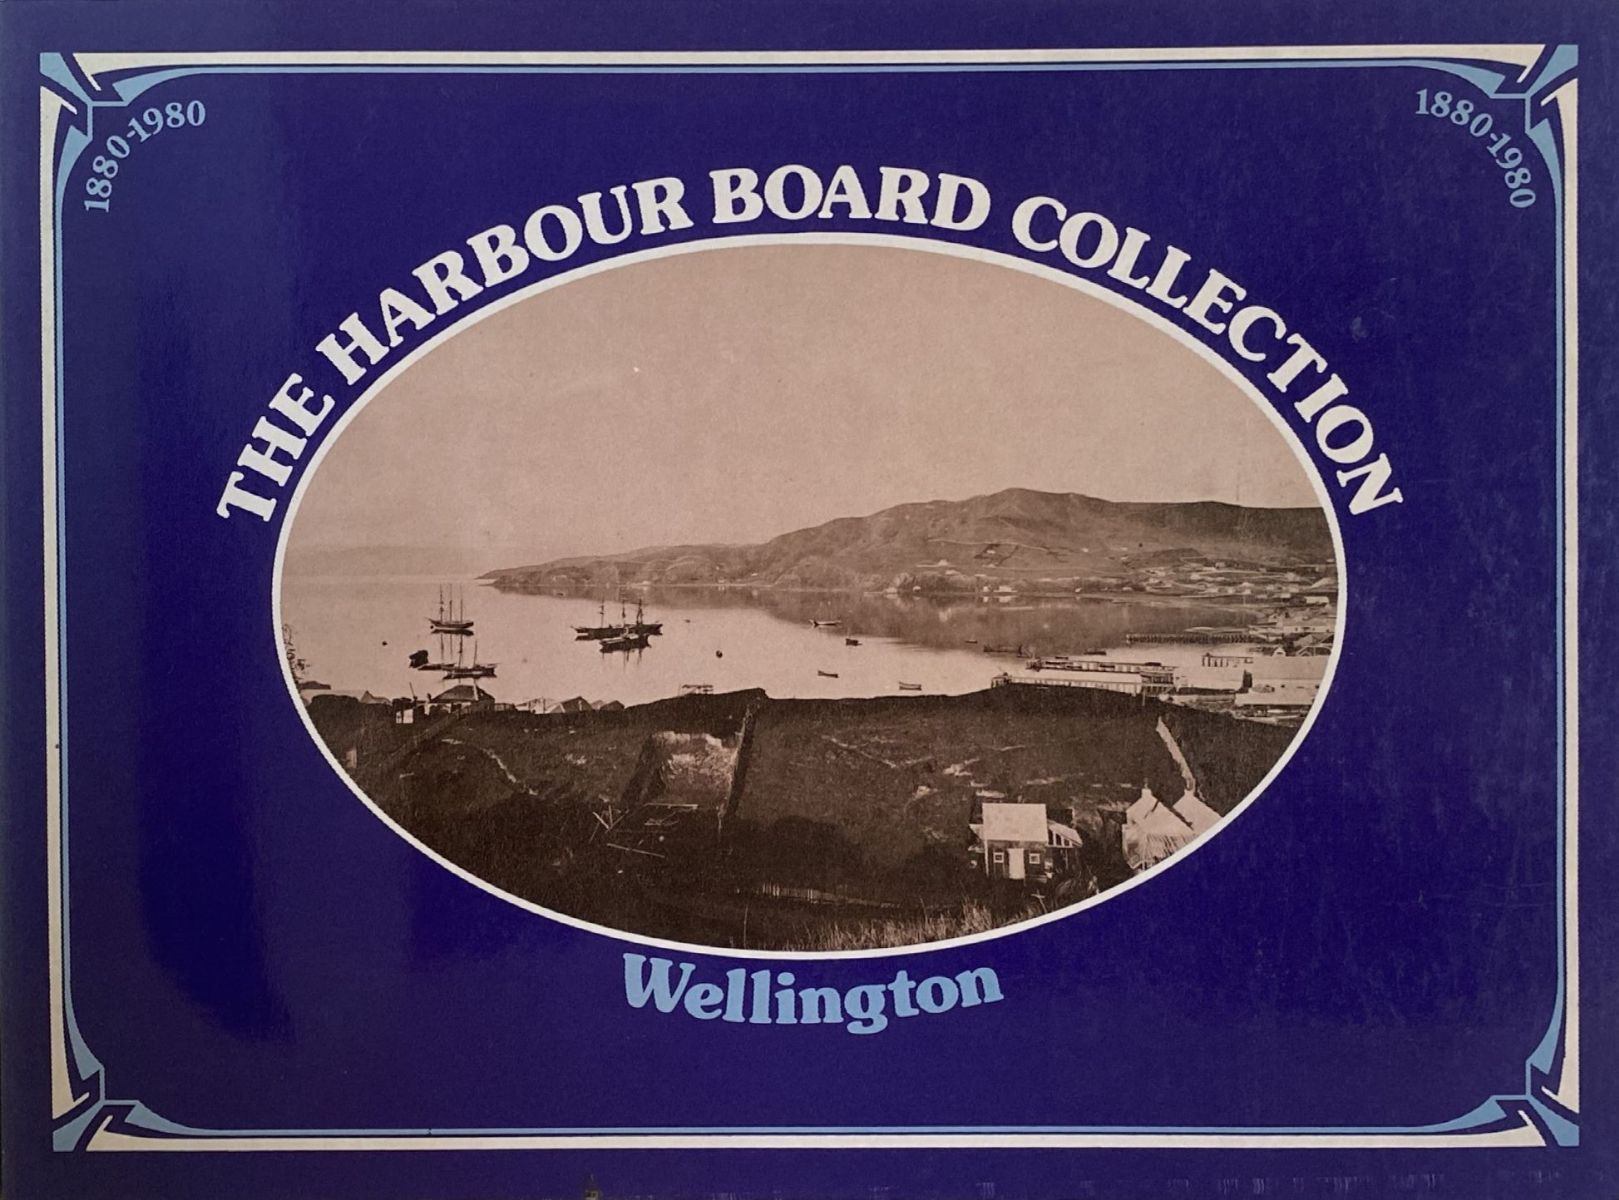 THE HARBOUR BOARD COLLECTION WELLINGTON 1880 to 1980 - Pictorial Record